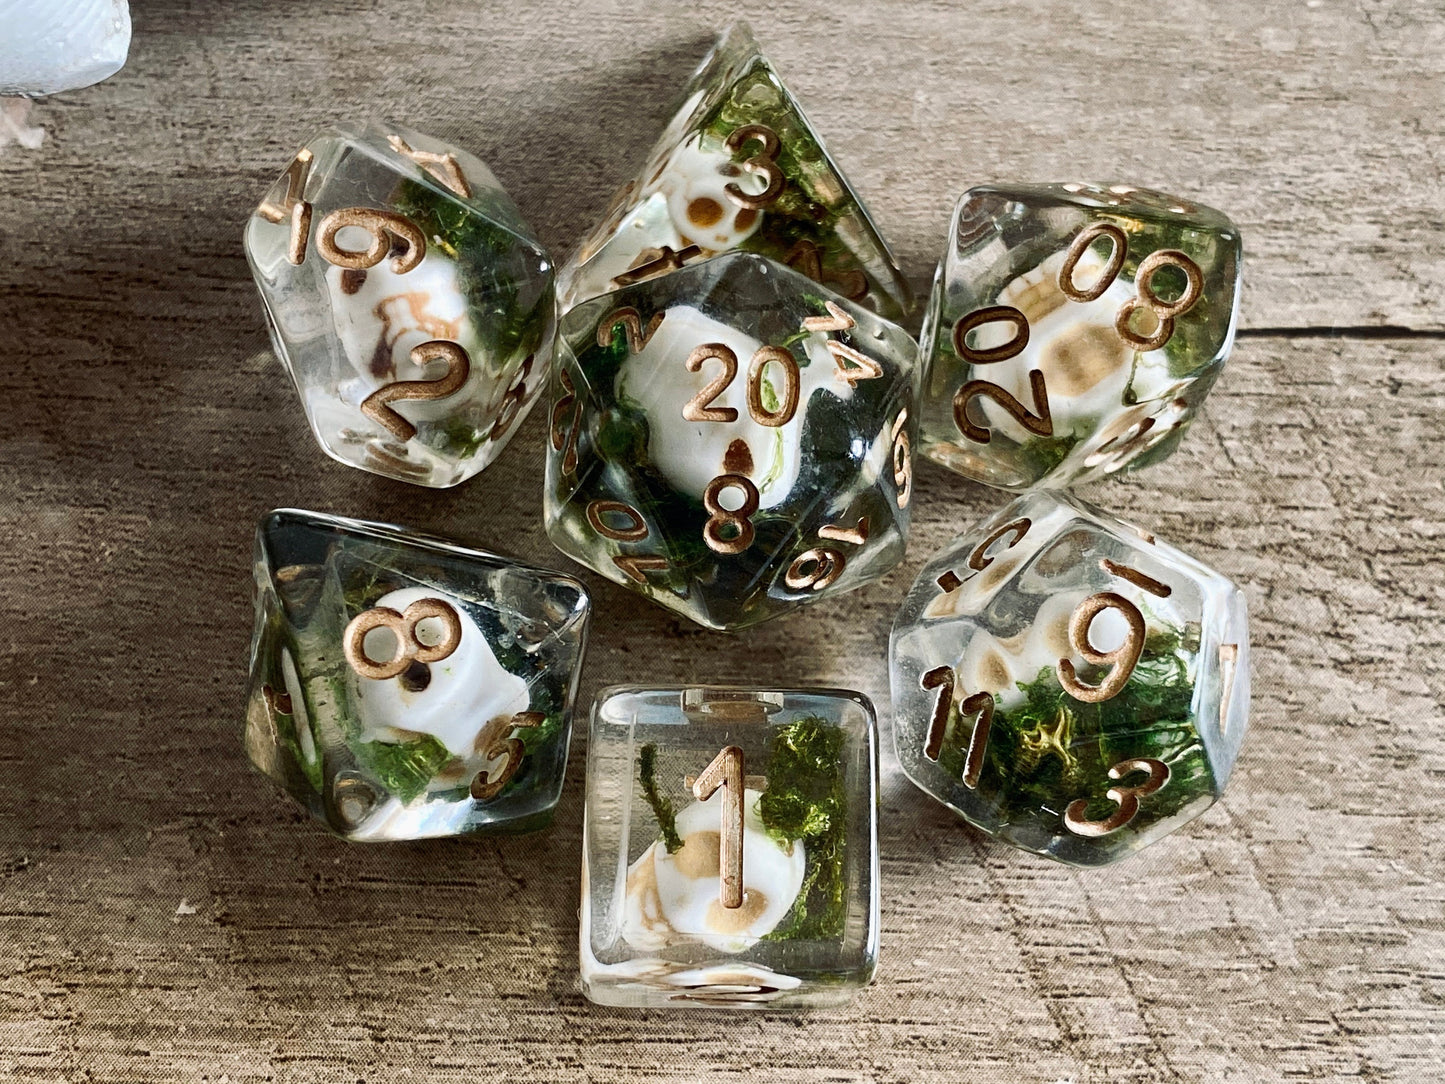 FREE Today: Undead Skull Dice Set (Give away a random dice)